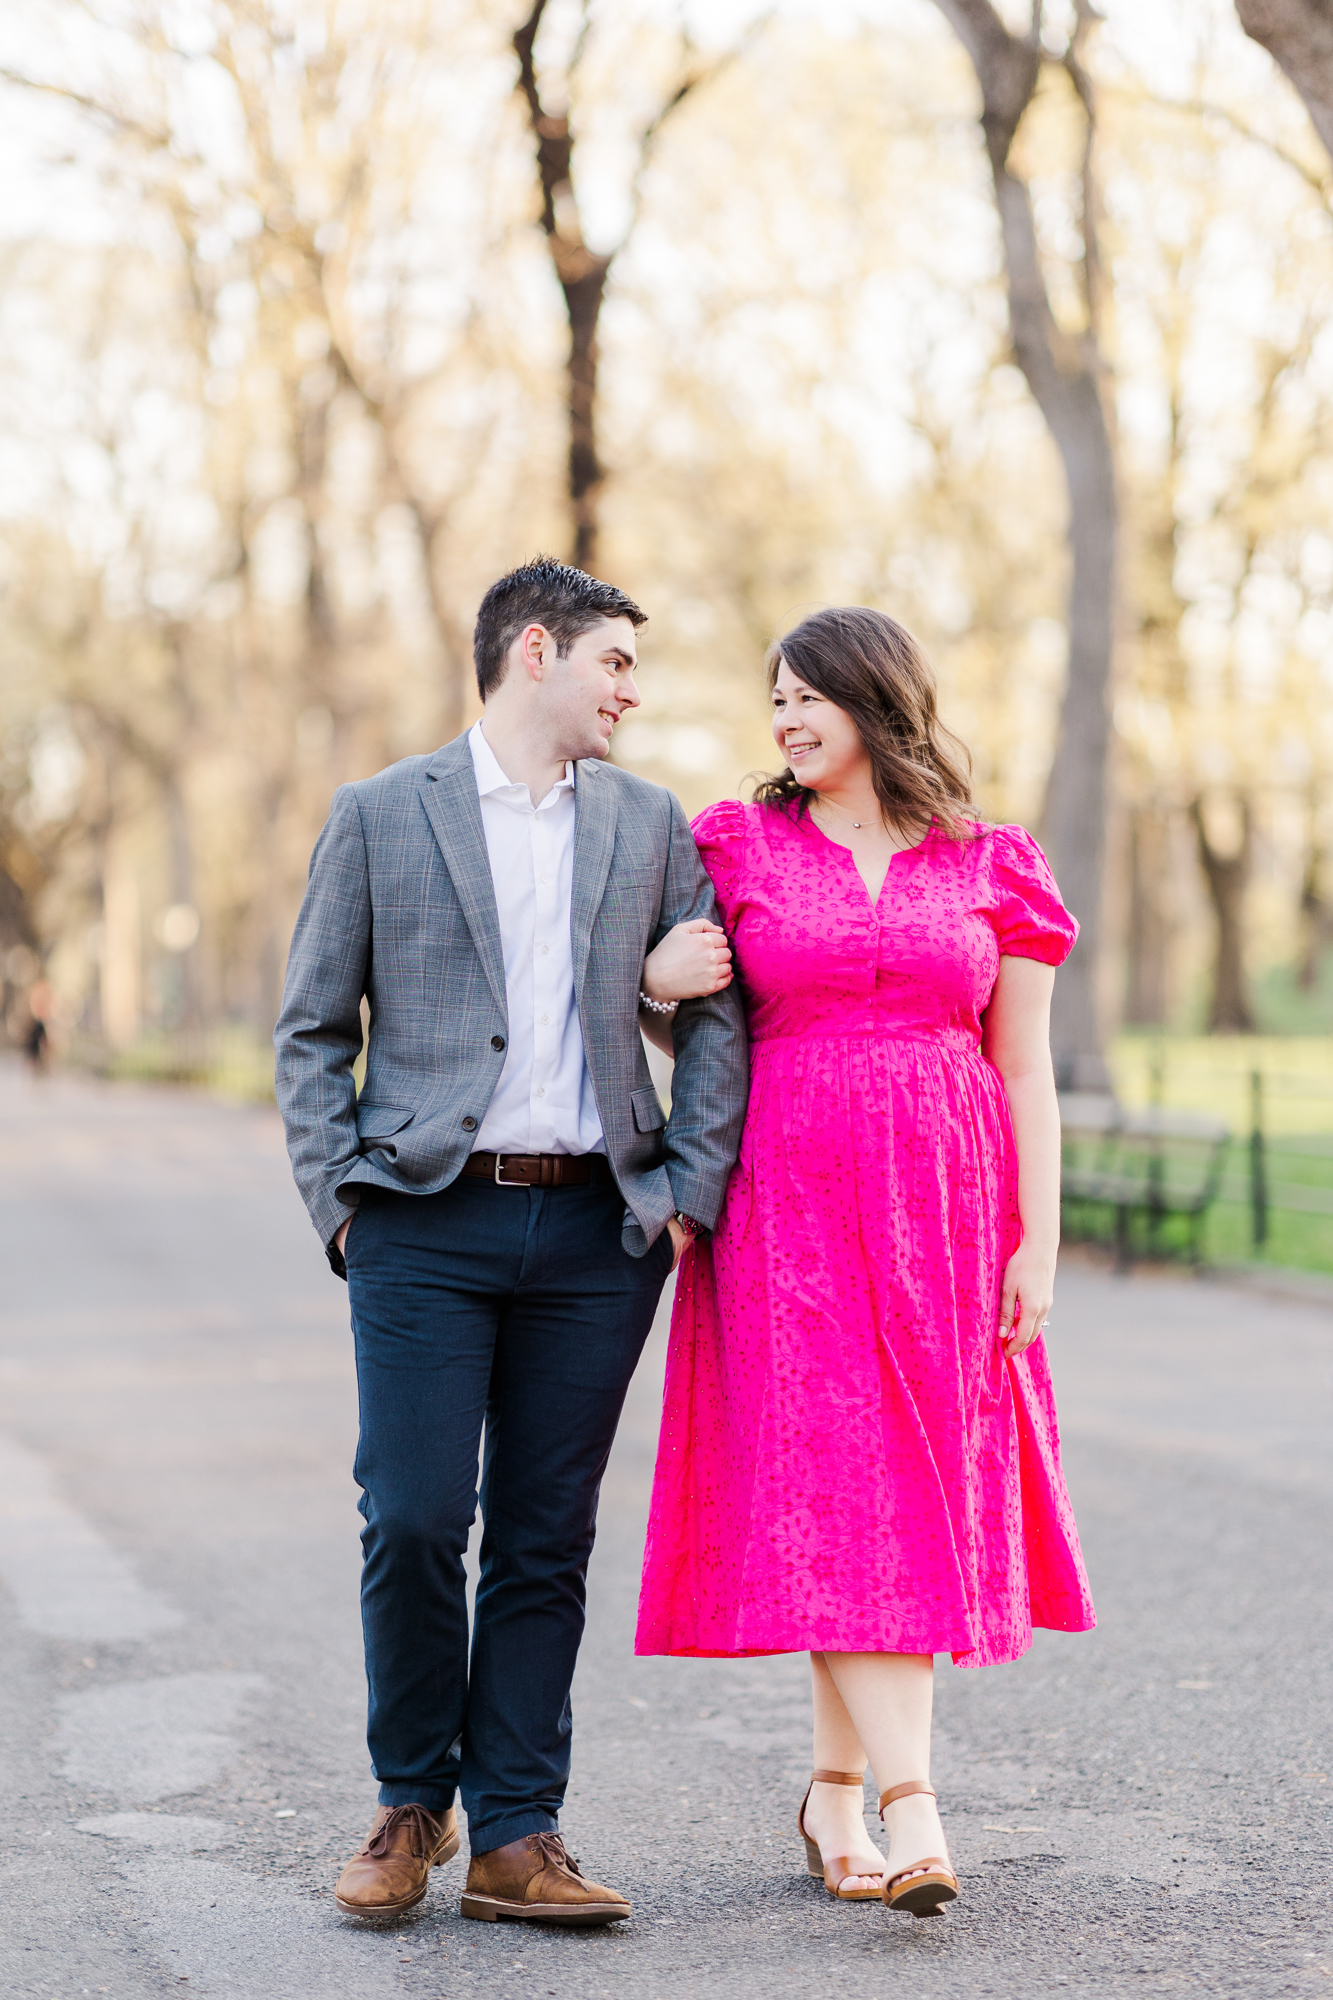 Joyful Spring Engagement Photography in NYC